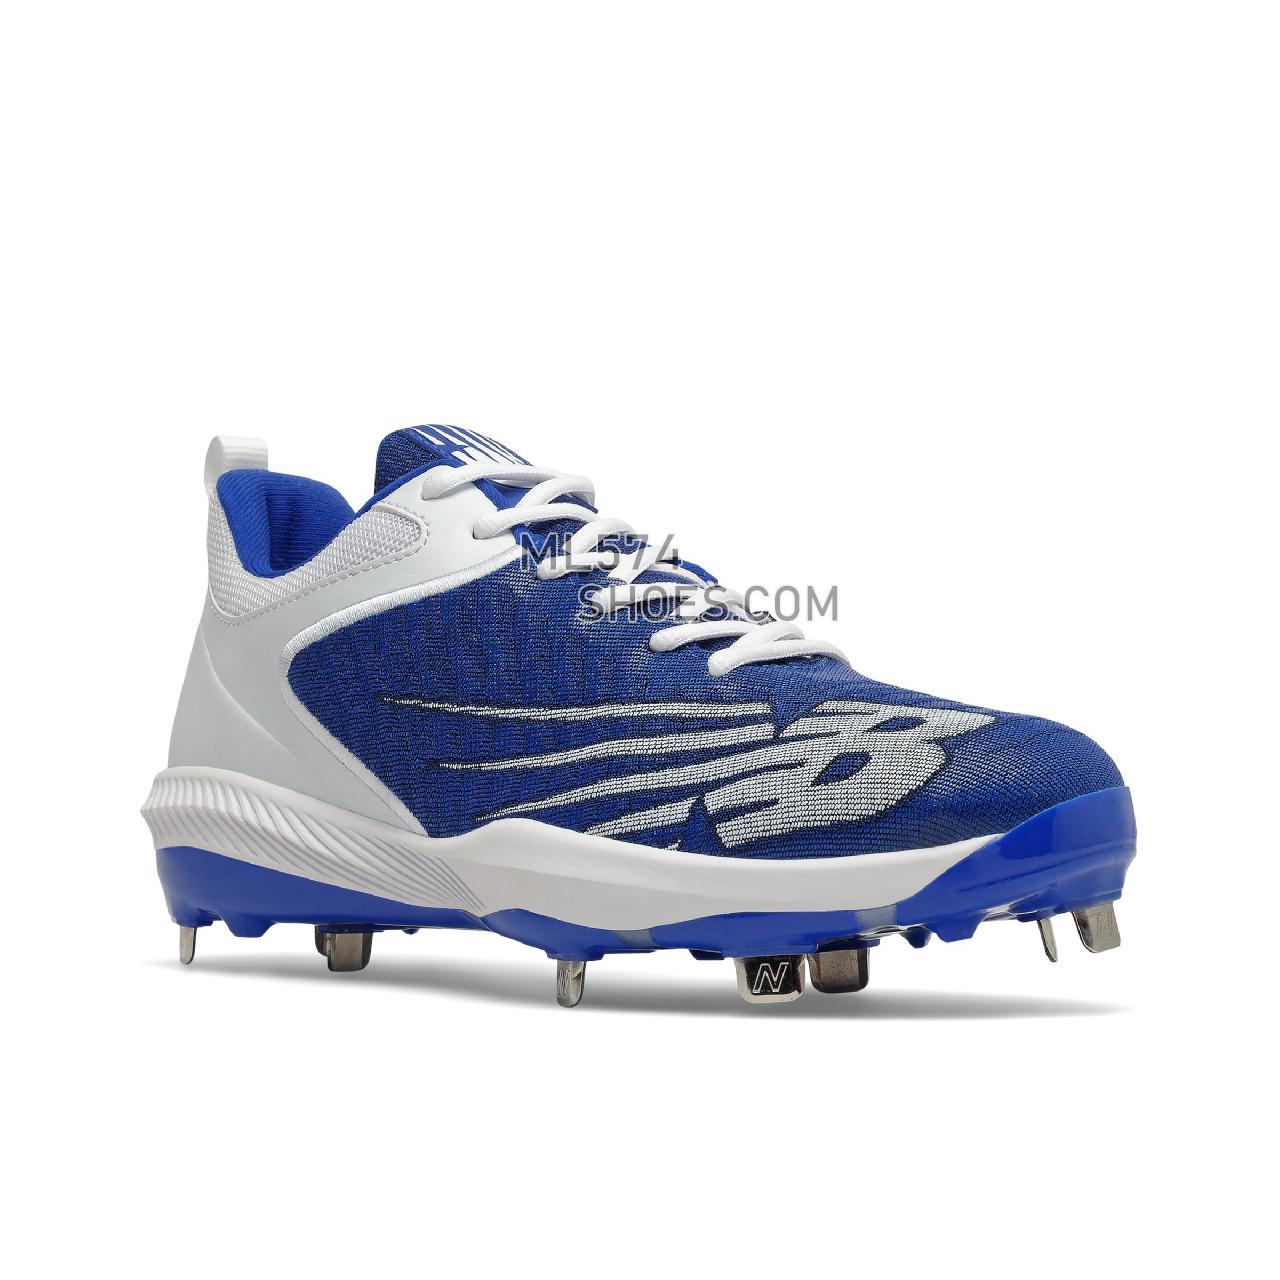 New Balance FuelCell 4040 v6 Metal - Men's Mid-Cut Baseball Cleats - Team Royal with White - L4040TB6